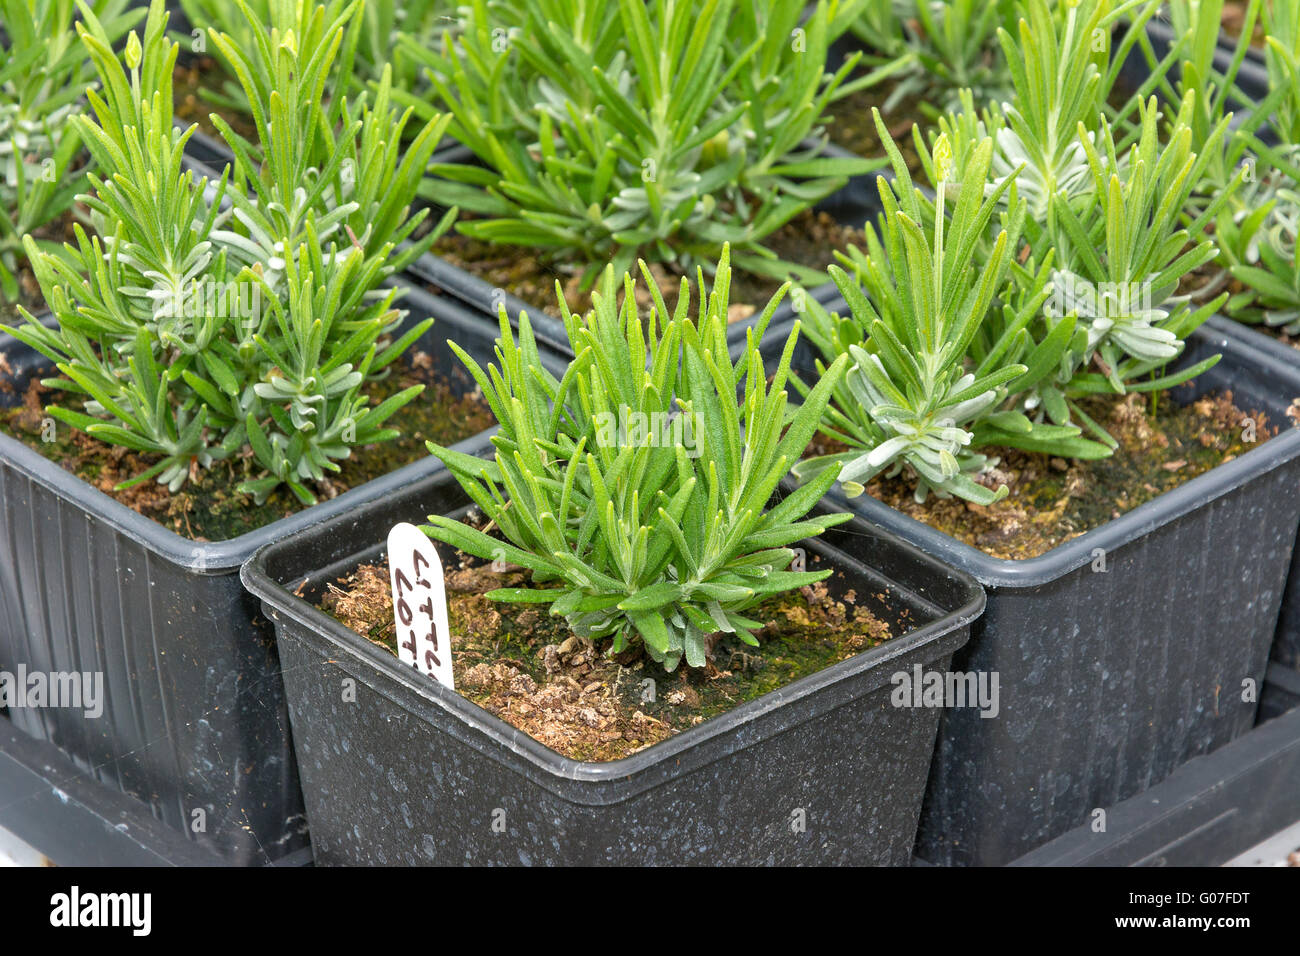 Young lavender seedlings grwon in pots ready for planting out. Stock Photo